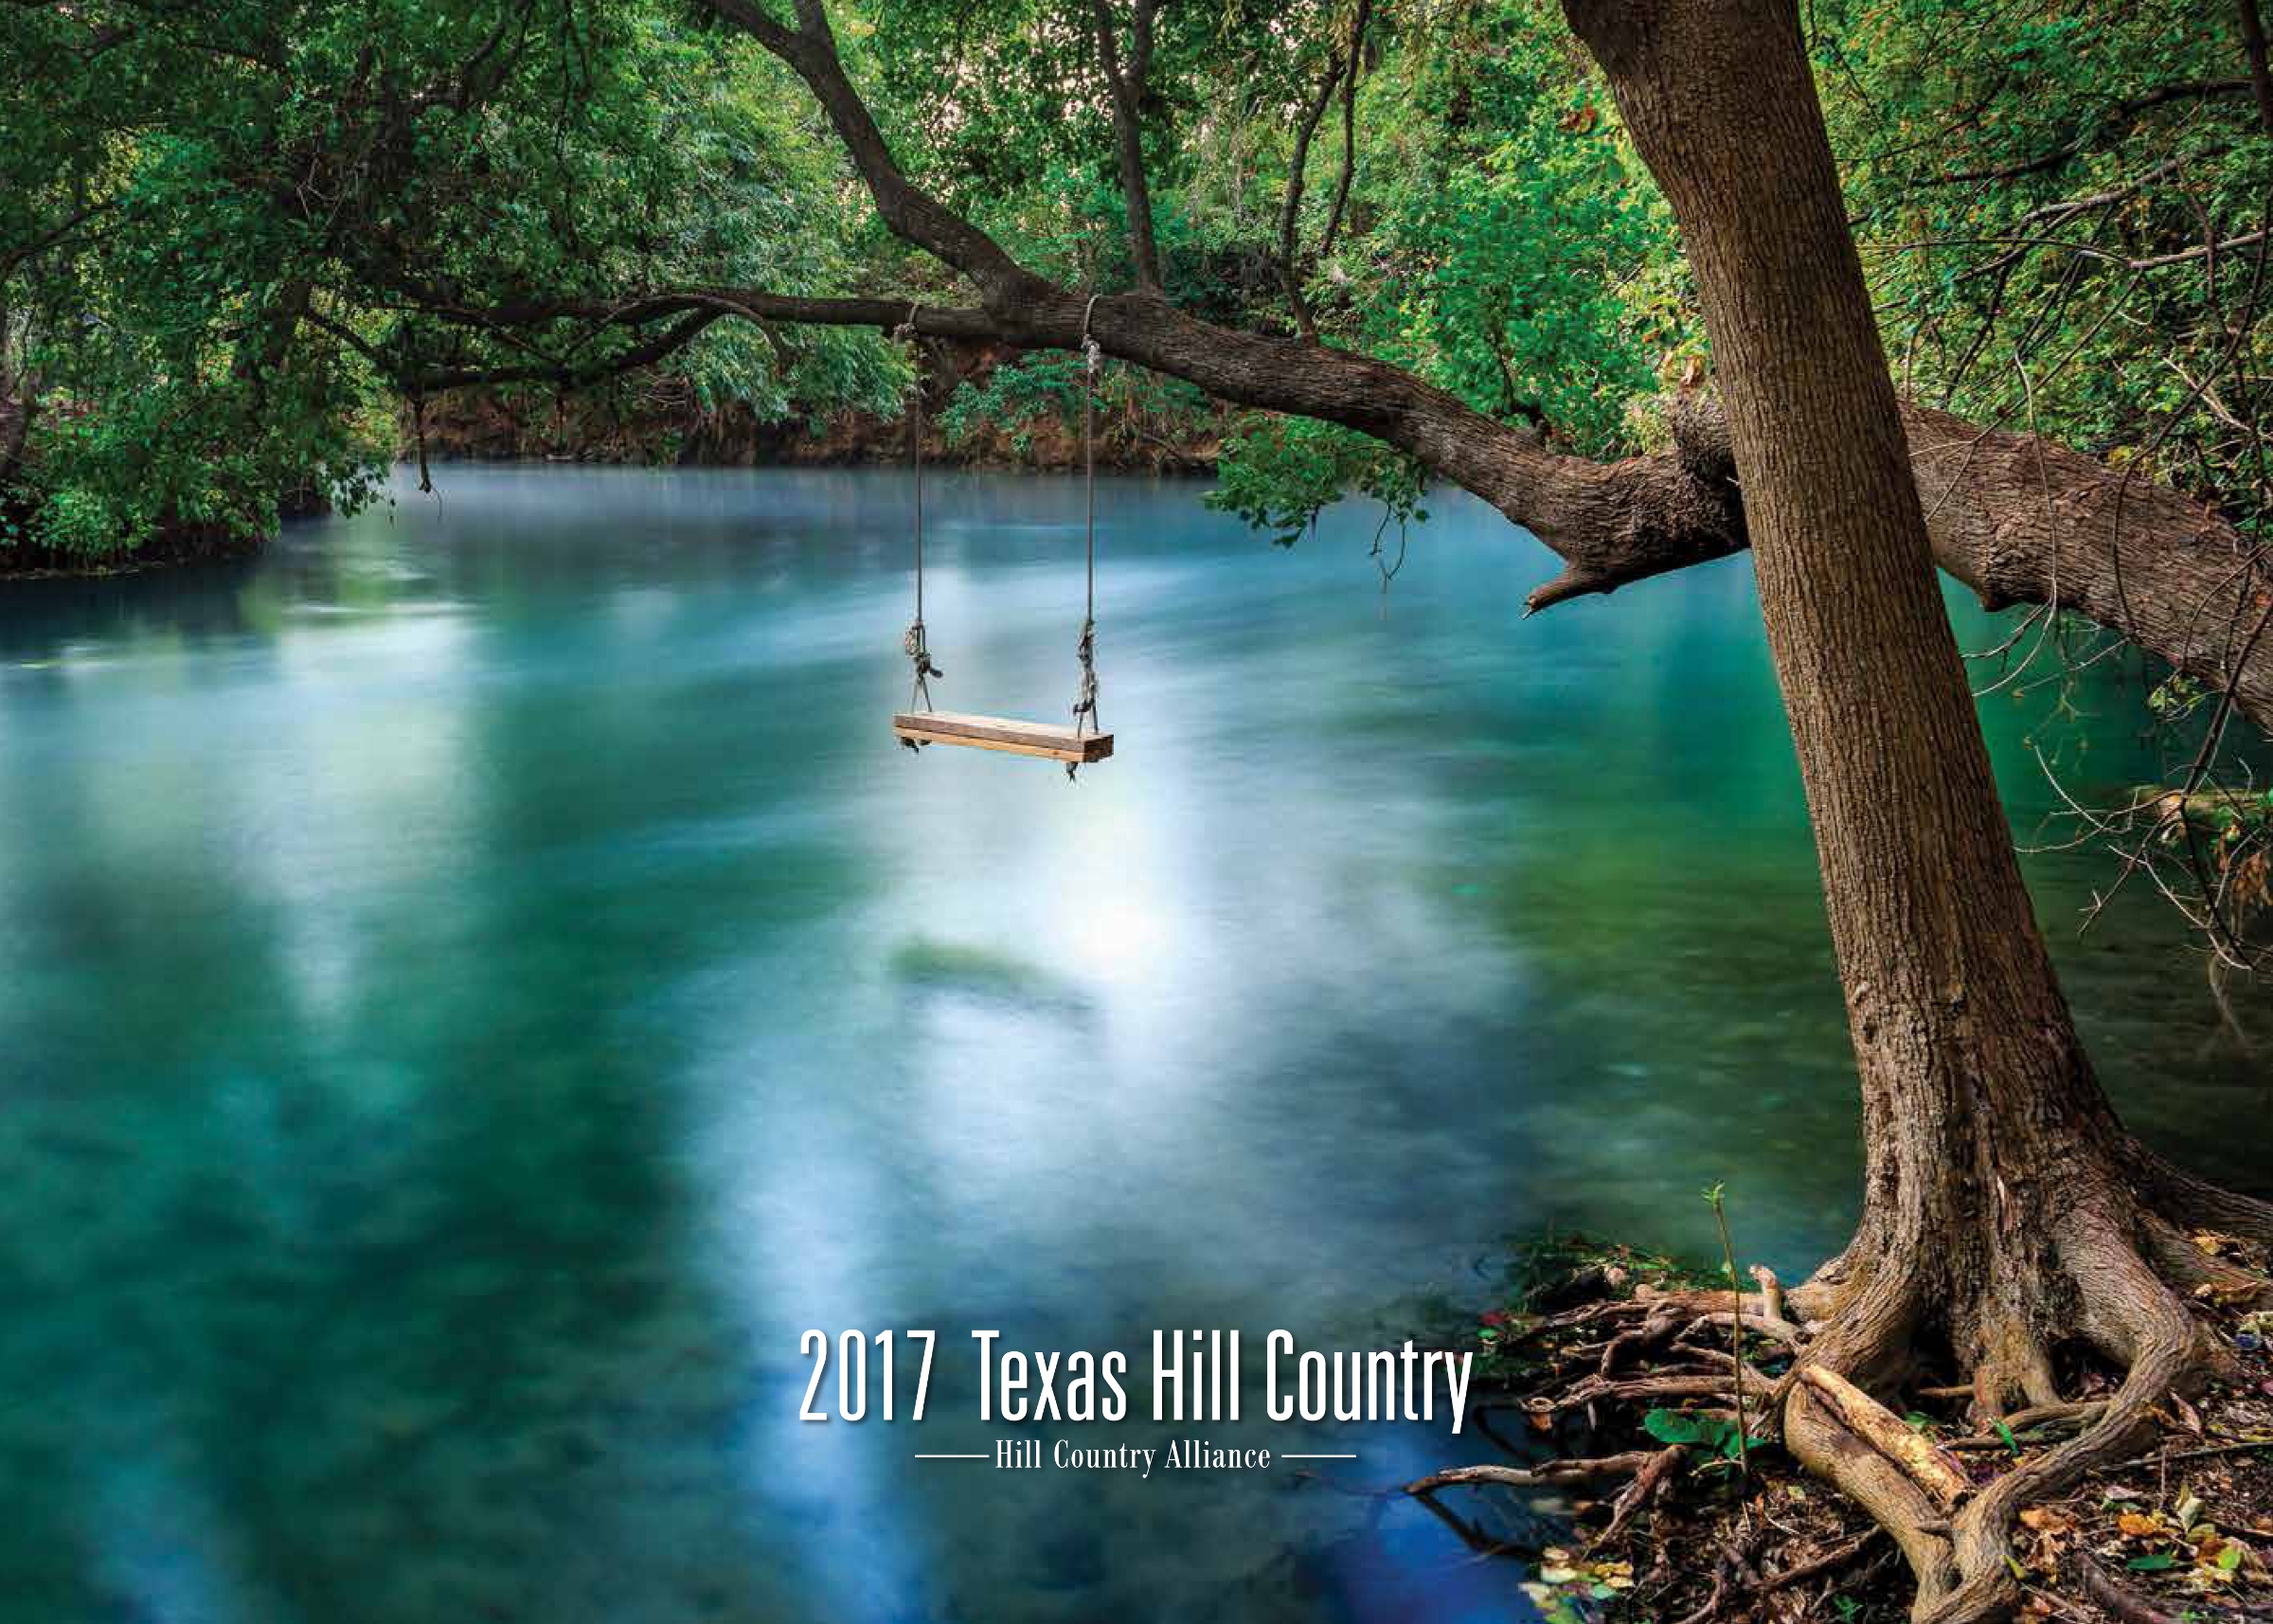 2017 Texas Hill Country Calendar Available for Sale Photo Contest